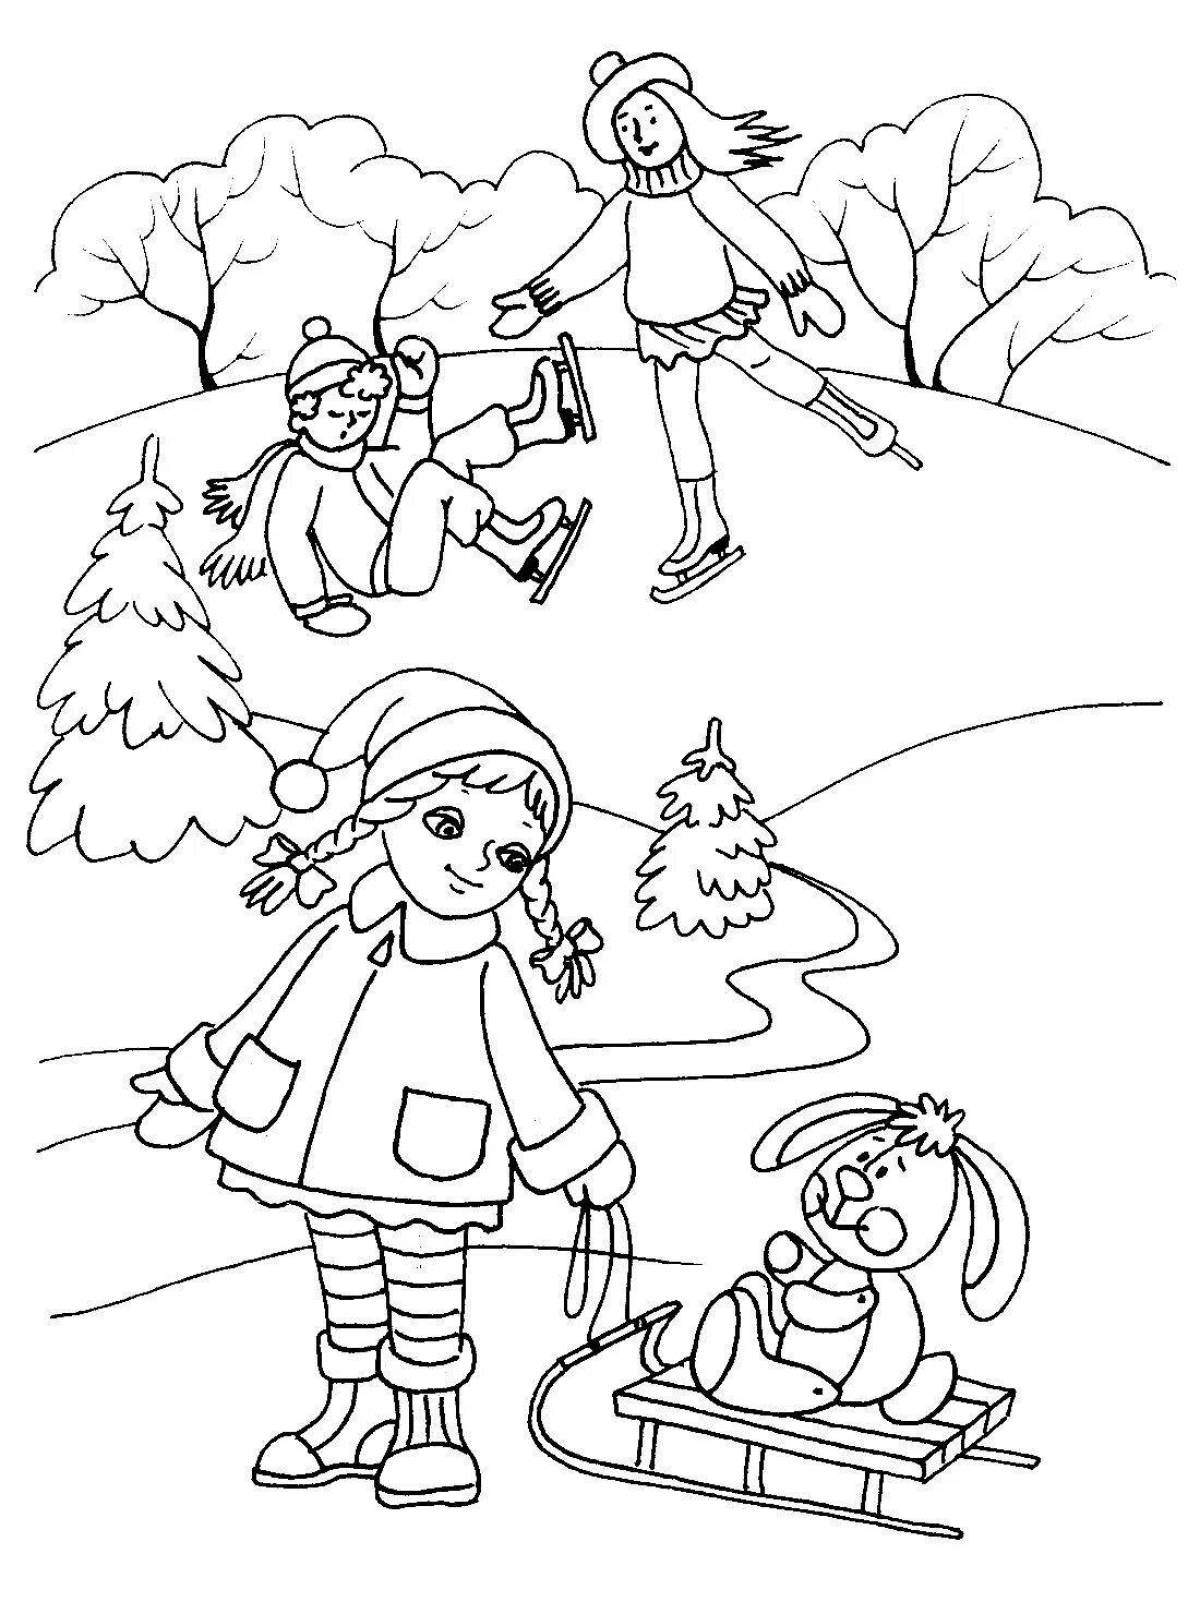 Exciting winter activities for children 3-4 years old